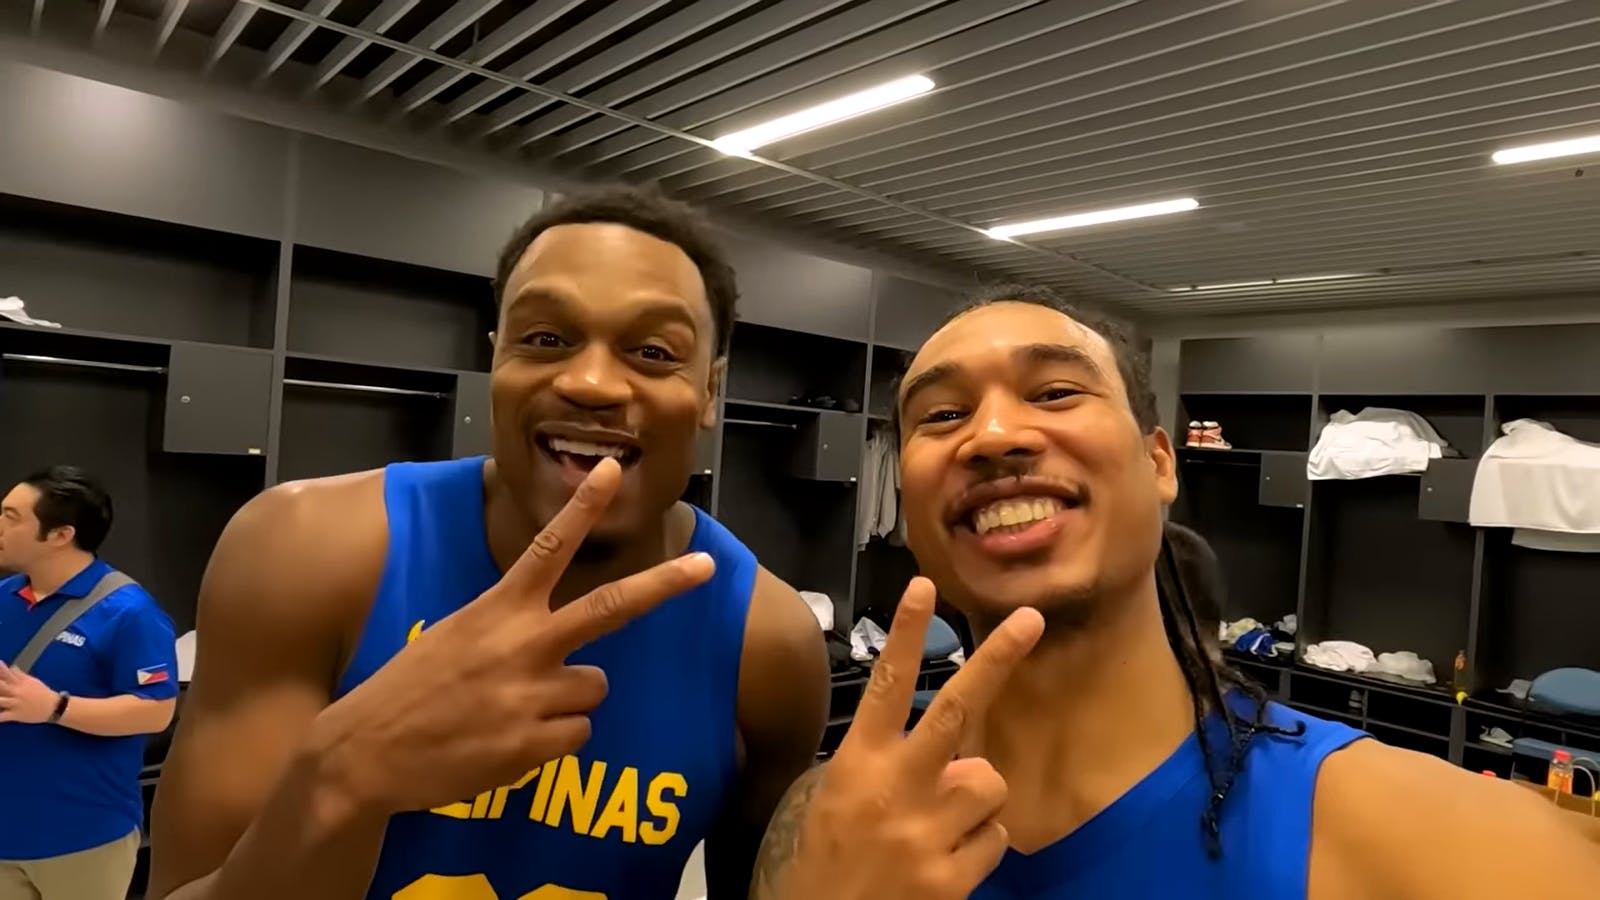 Turn up: Chris Newsome shares never-before-seen Gilas locker room footage from Asian Games